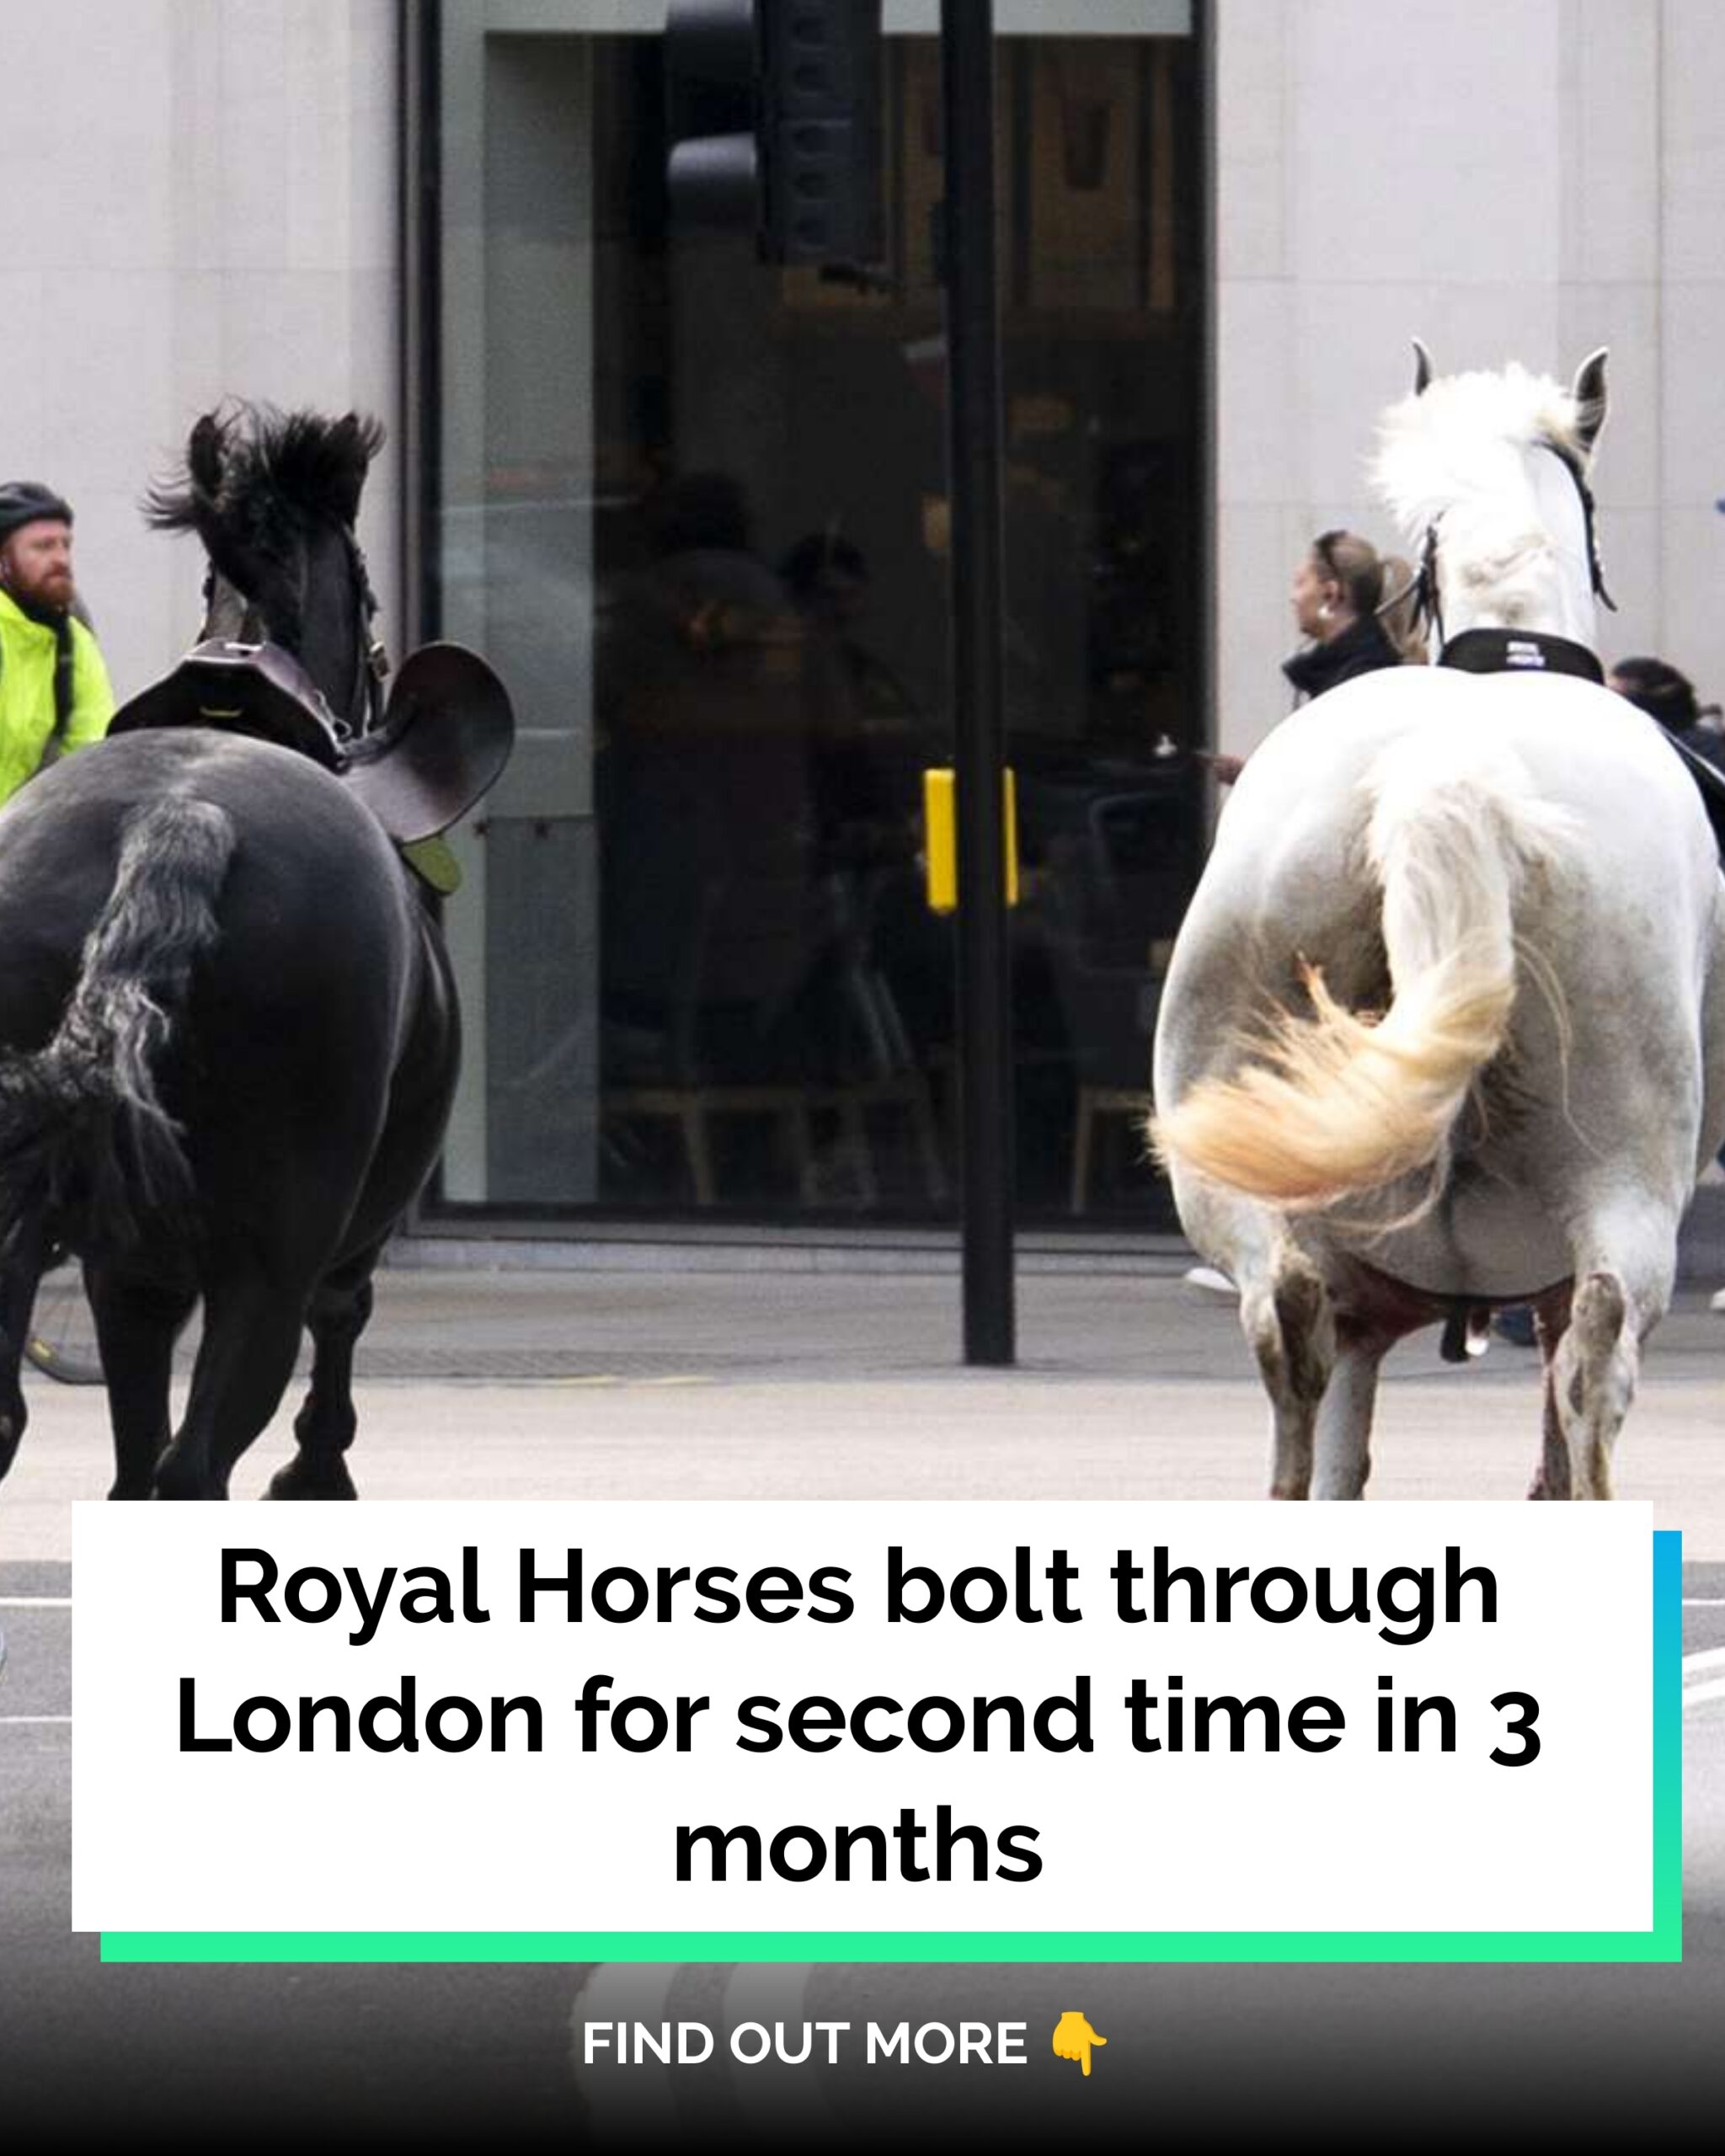 Royal Horses Bolt Through London for Second Time in 3 Months